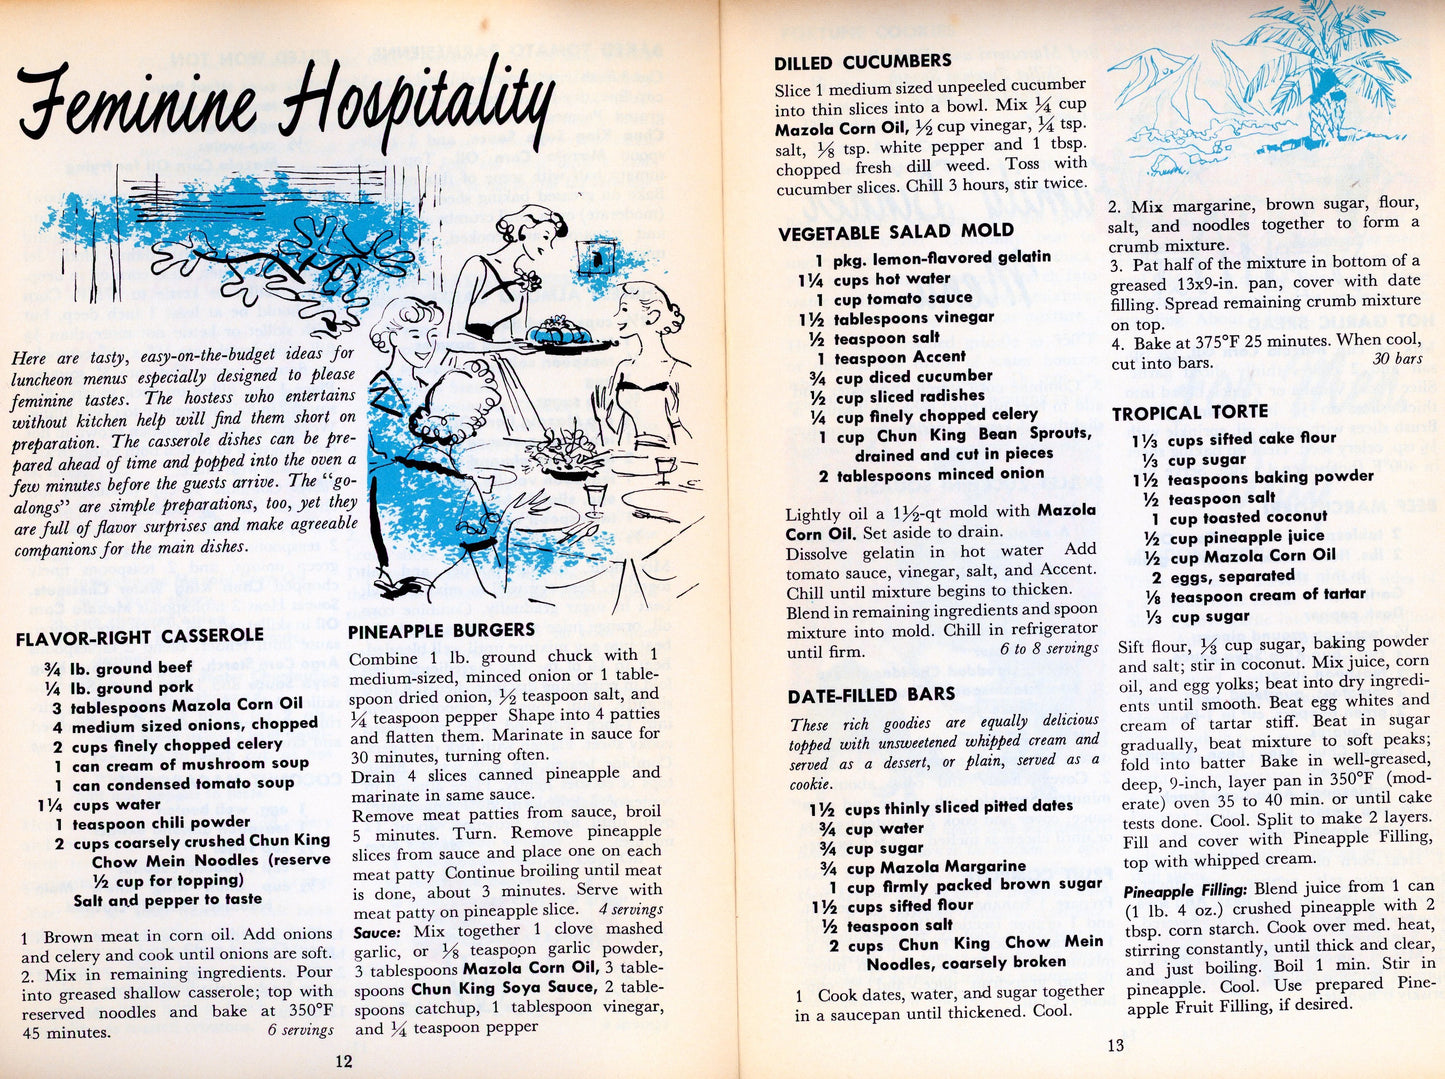 ORIENTAL COOKERY Vintage Recipe Booklet Produced by Chun King and Mazola Corn Oil Circa 1962